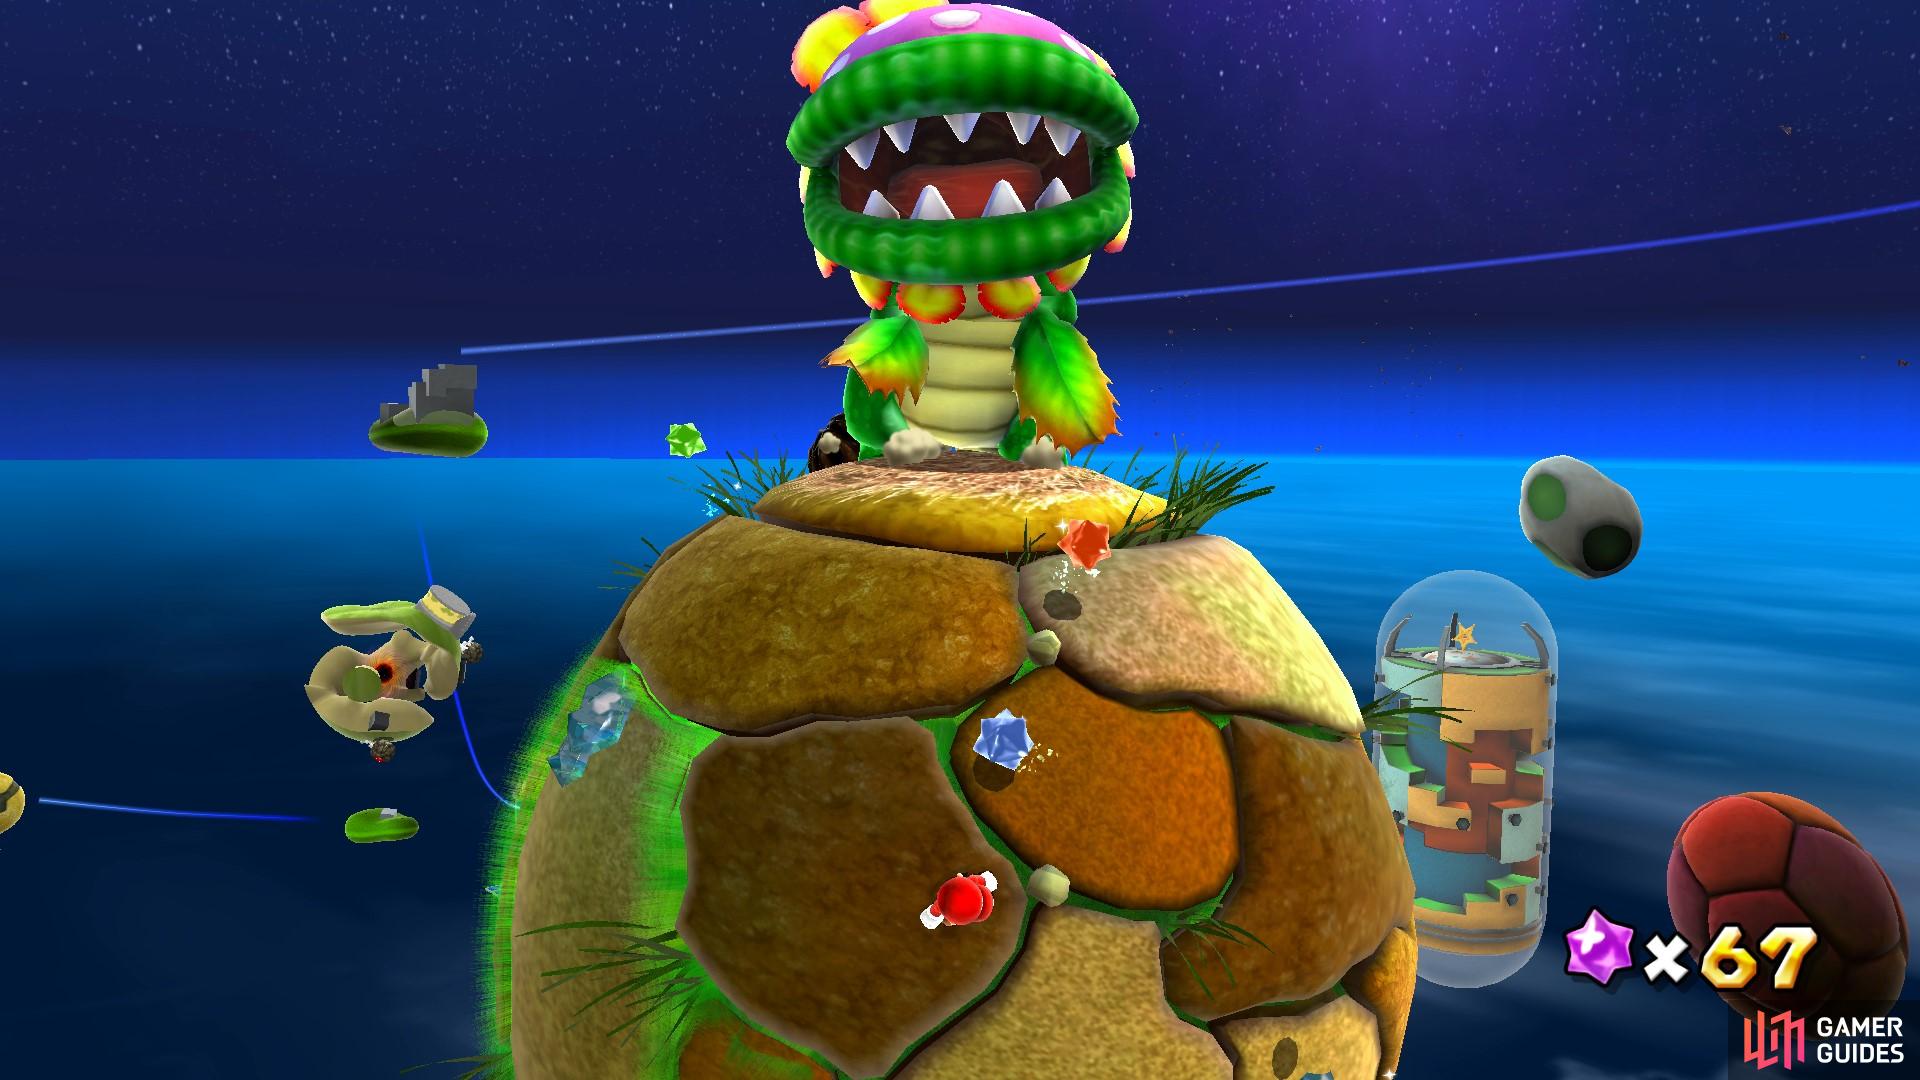 The Dino Piranha is the first boss you’ll encounter in the game!